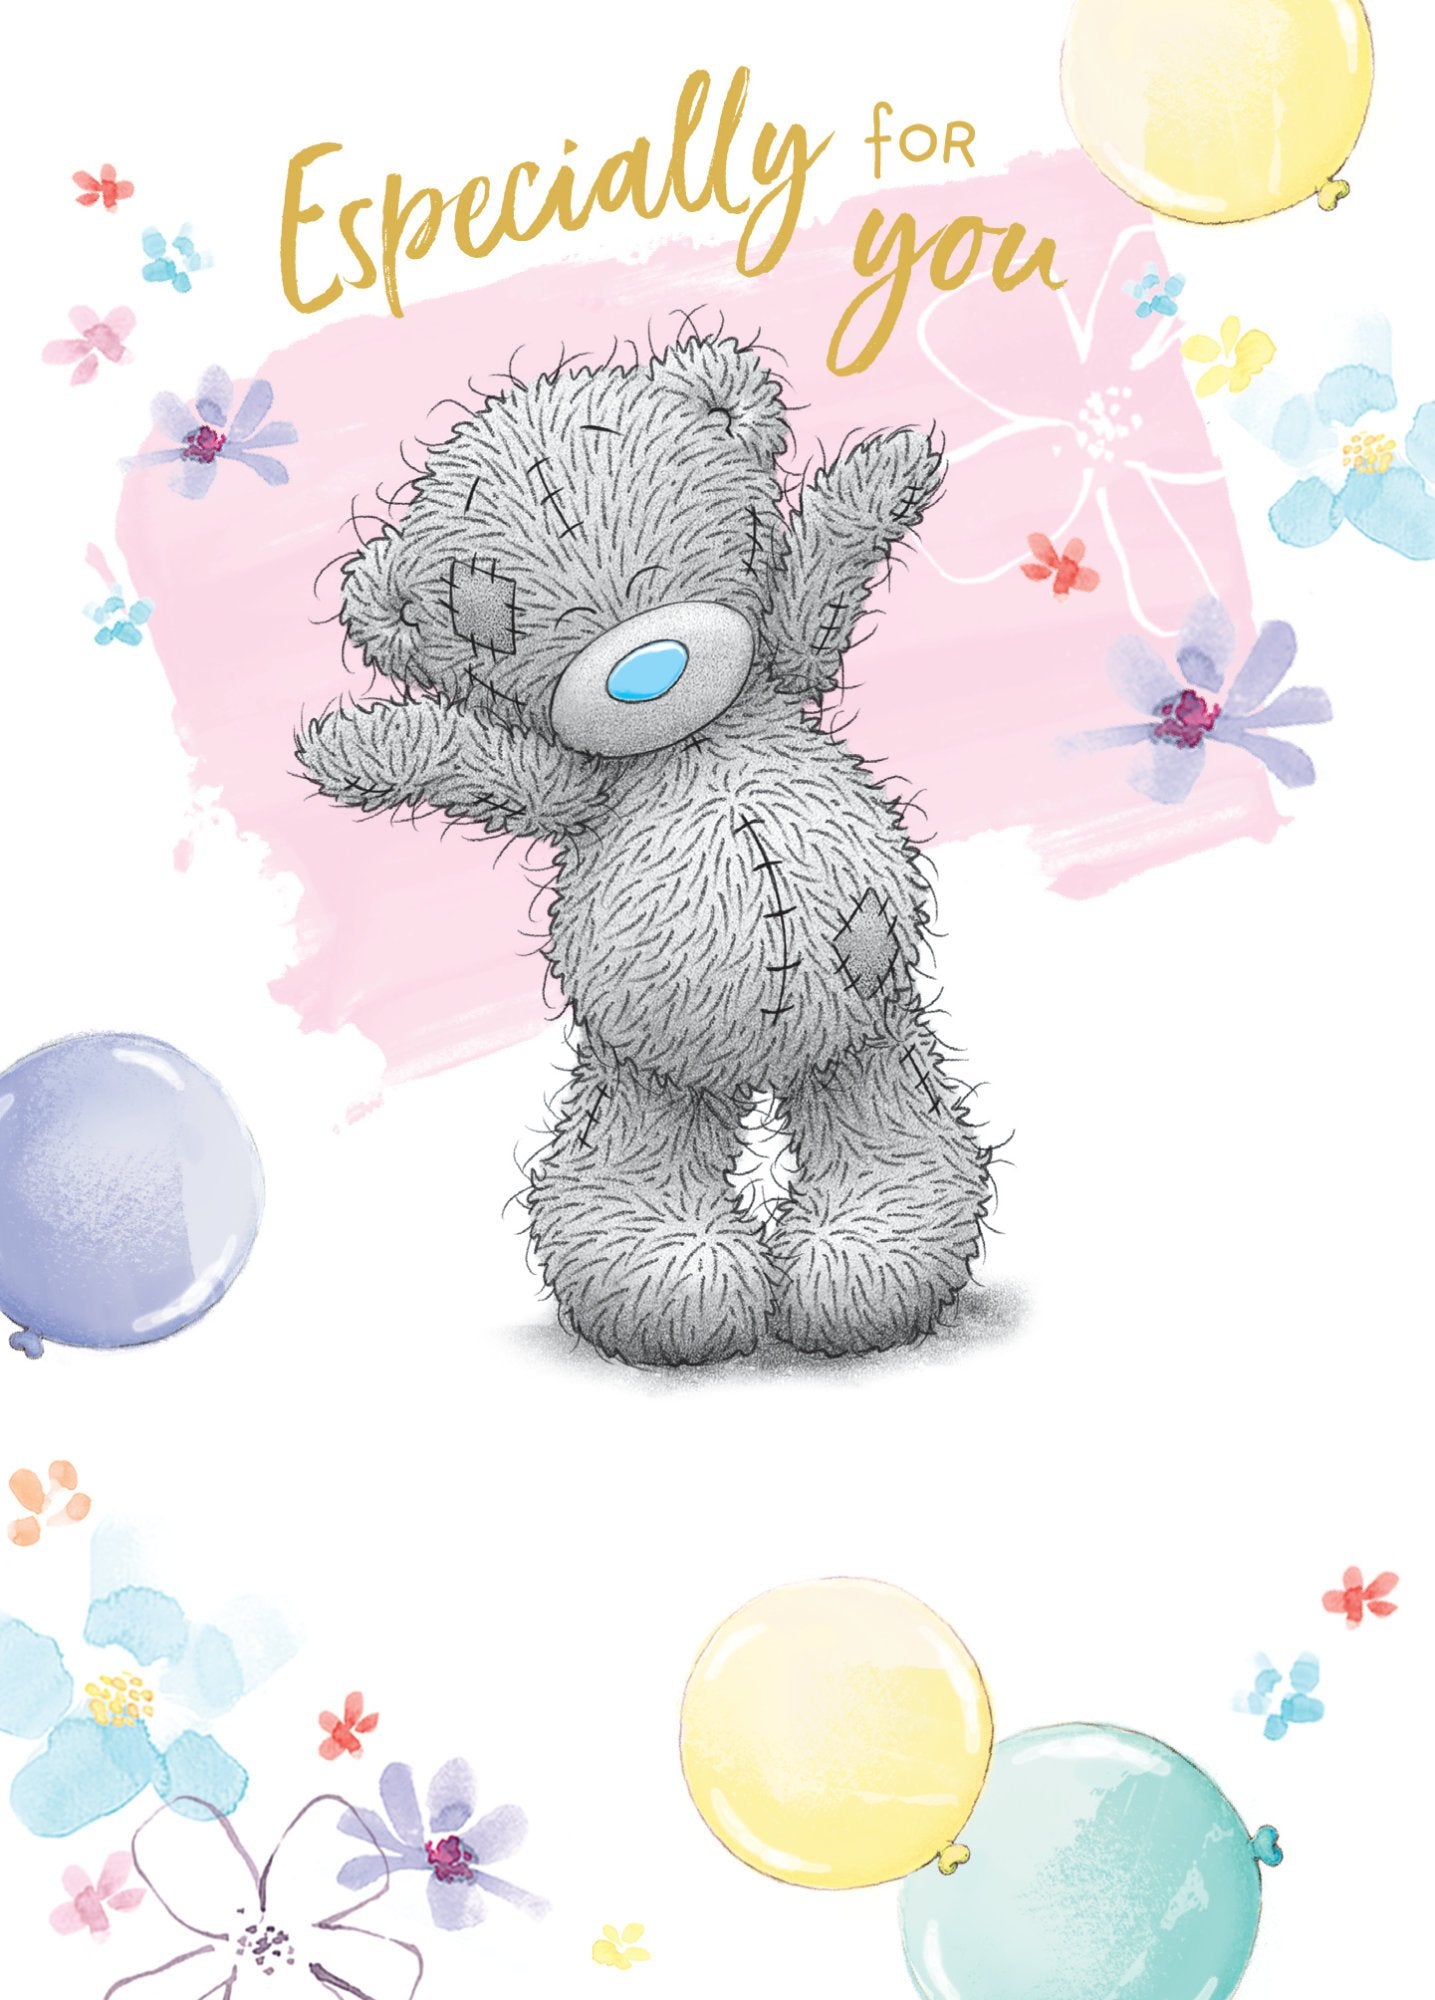 Photograph of Bear Standing Greetings Card at Nicole's Shop